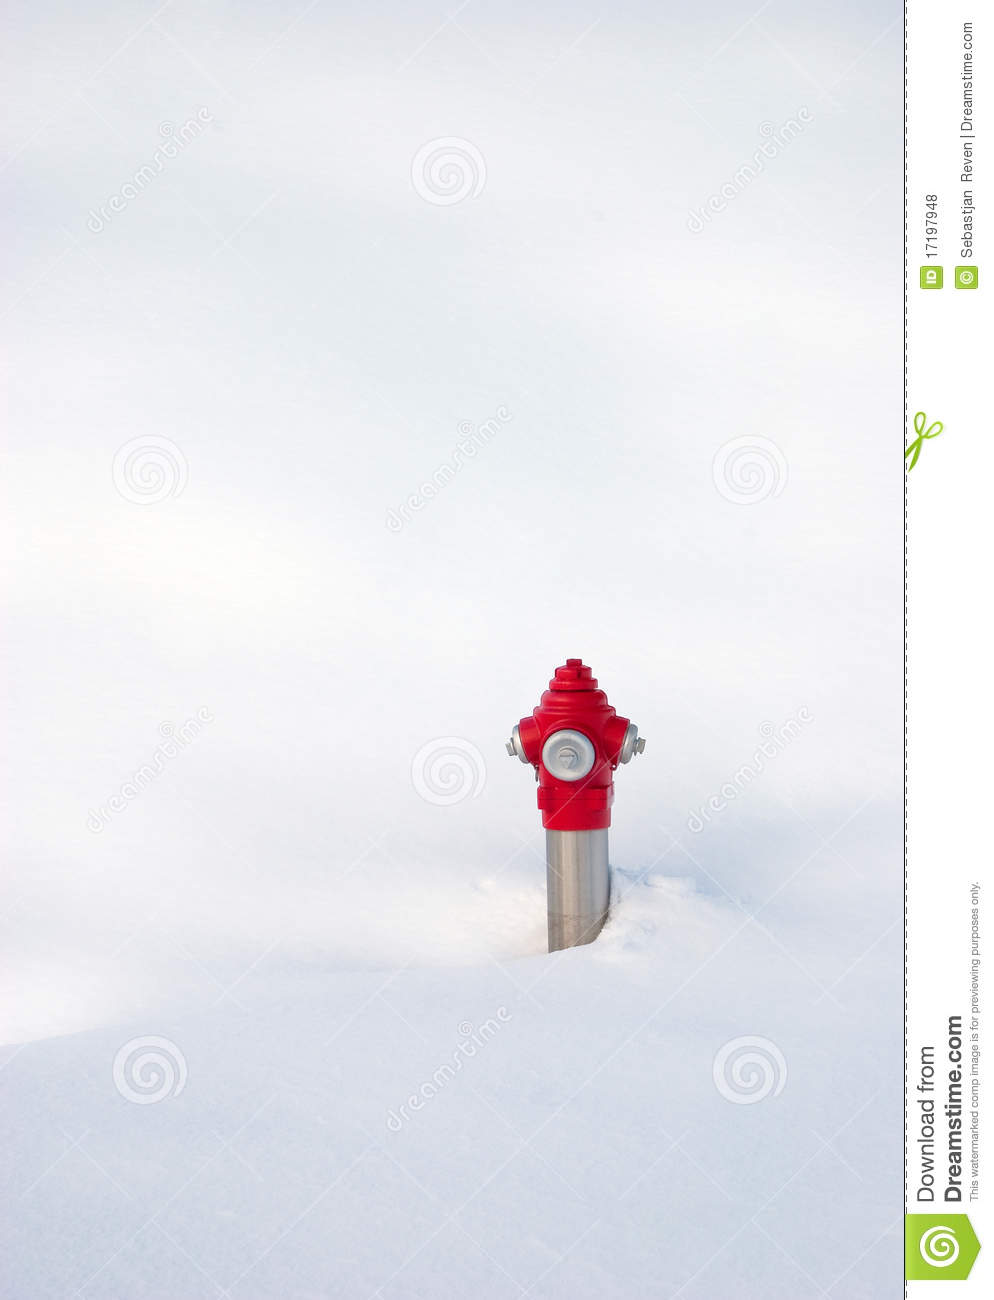 Fire Hydrant In Fresh Snow Royalty Free Stock Photos   Image  17197948